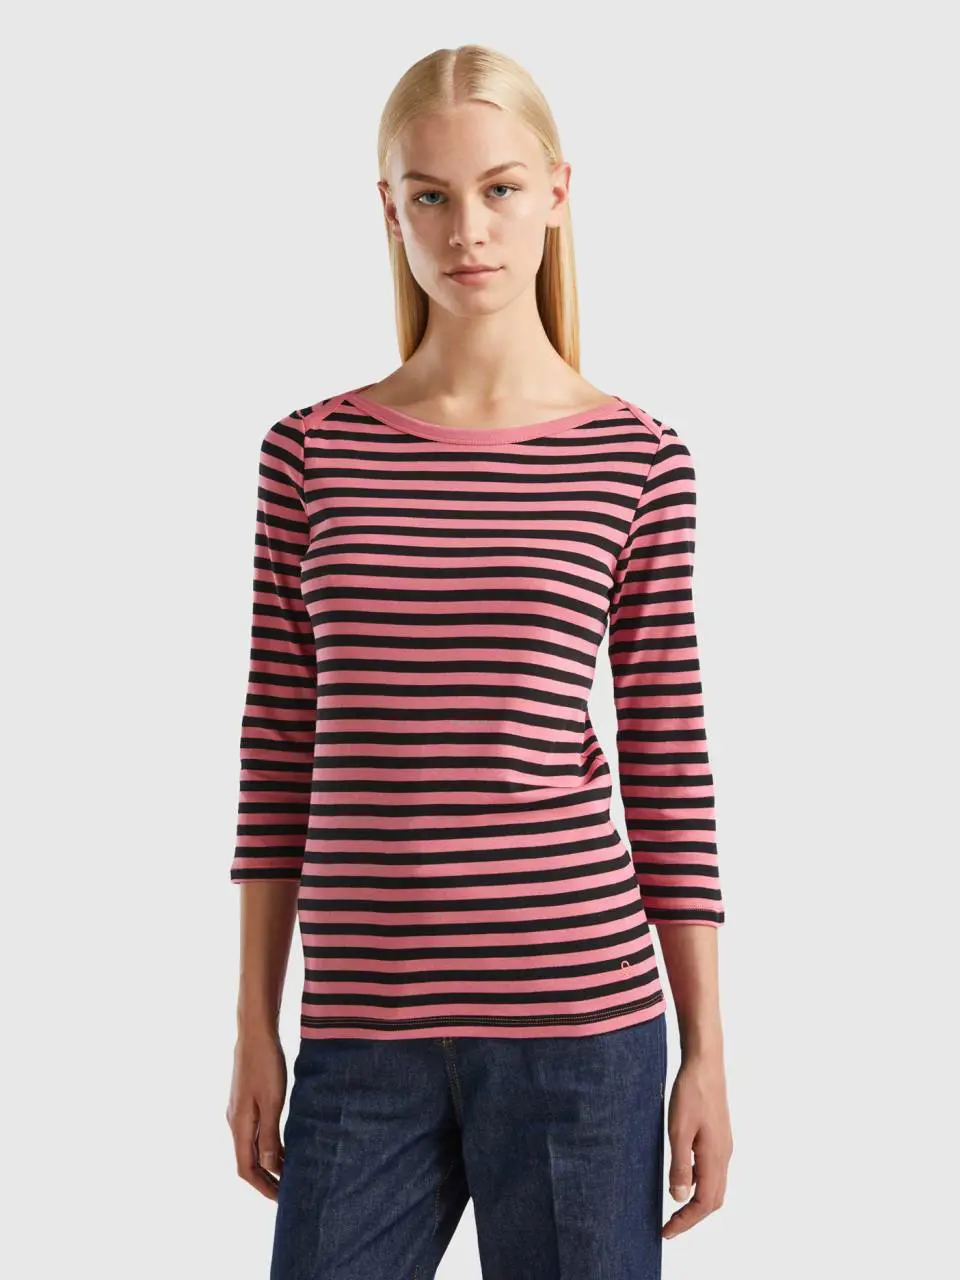 Benetton striped 3/4 sleeve t-shirt in 100% cotton. 1